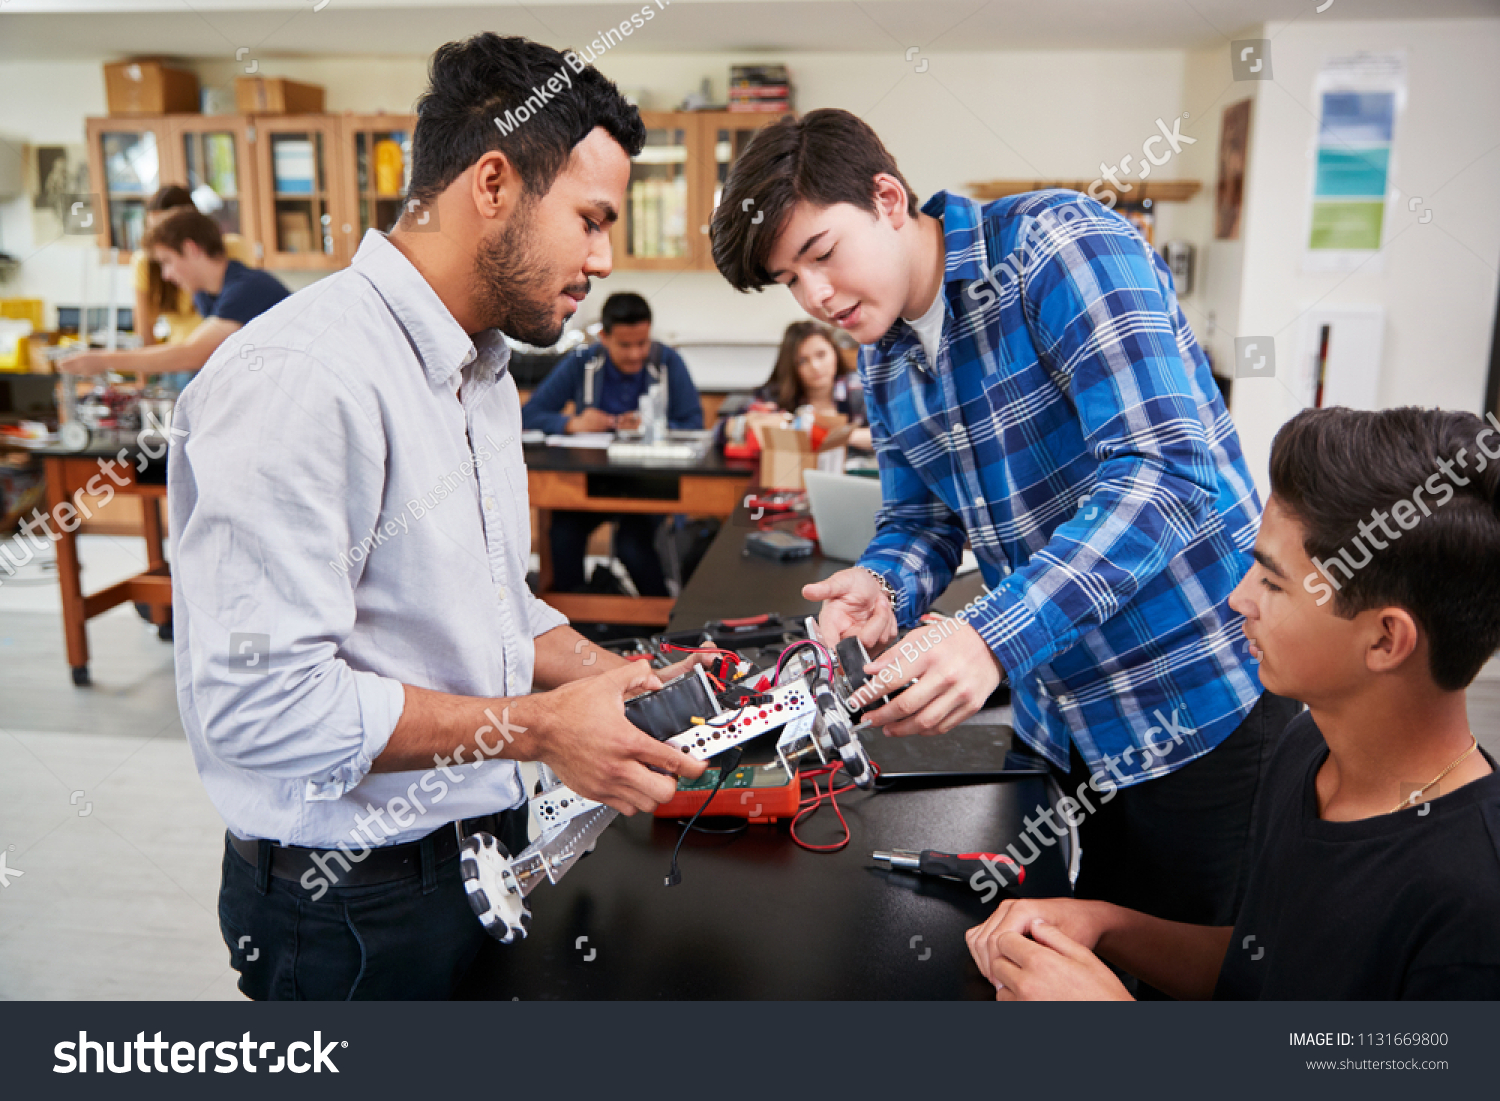 Teacher With Male Pupils Building Robotic Vehicle In Science Lesson #1131669800